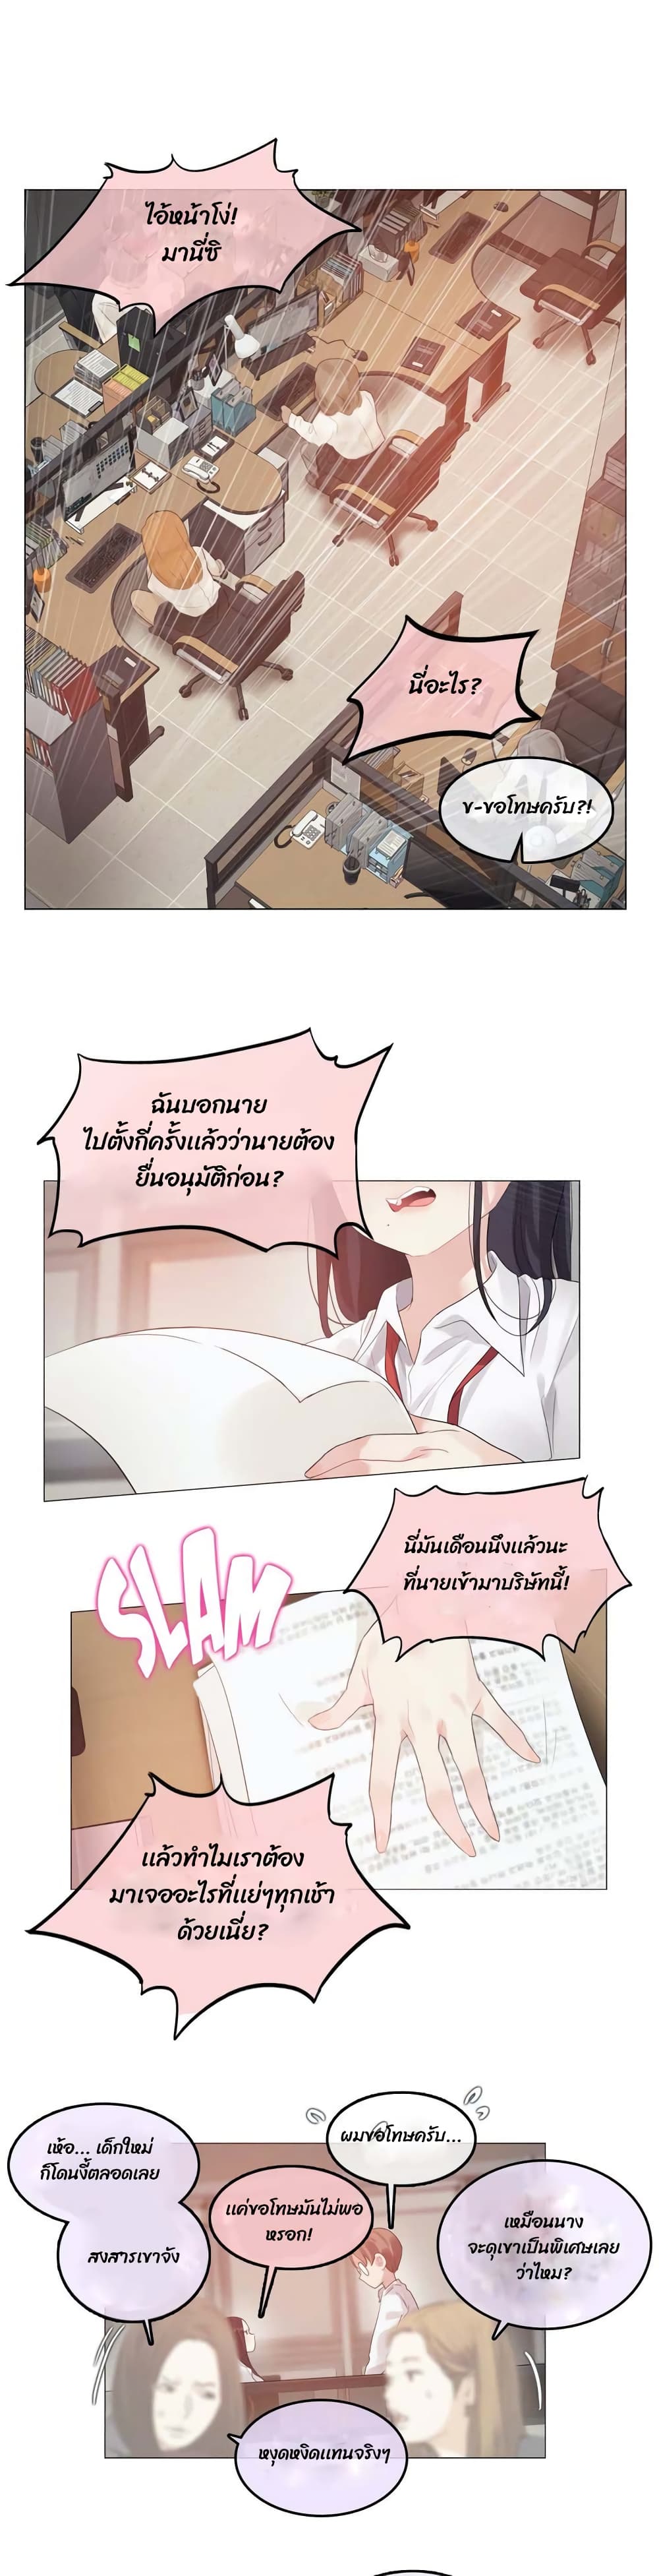 A Pervert's Daily Life 92 (1)